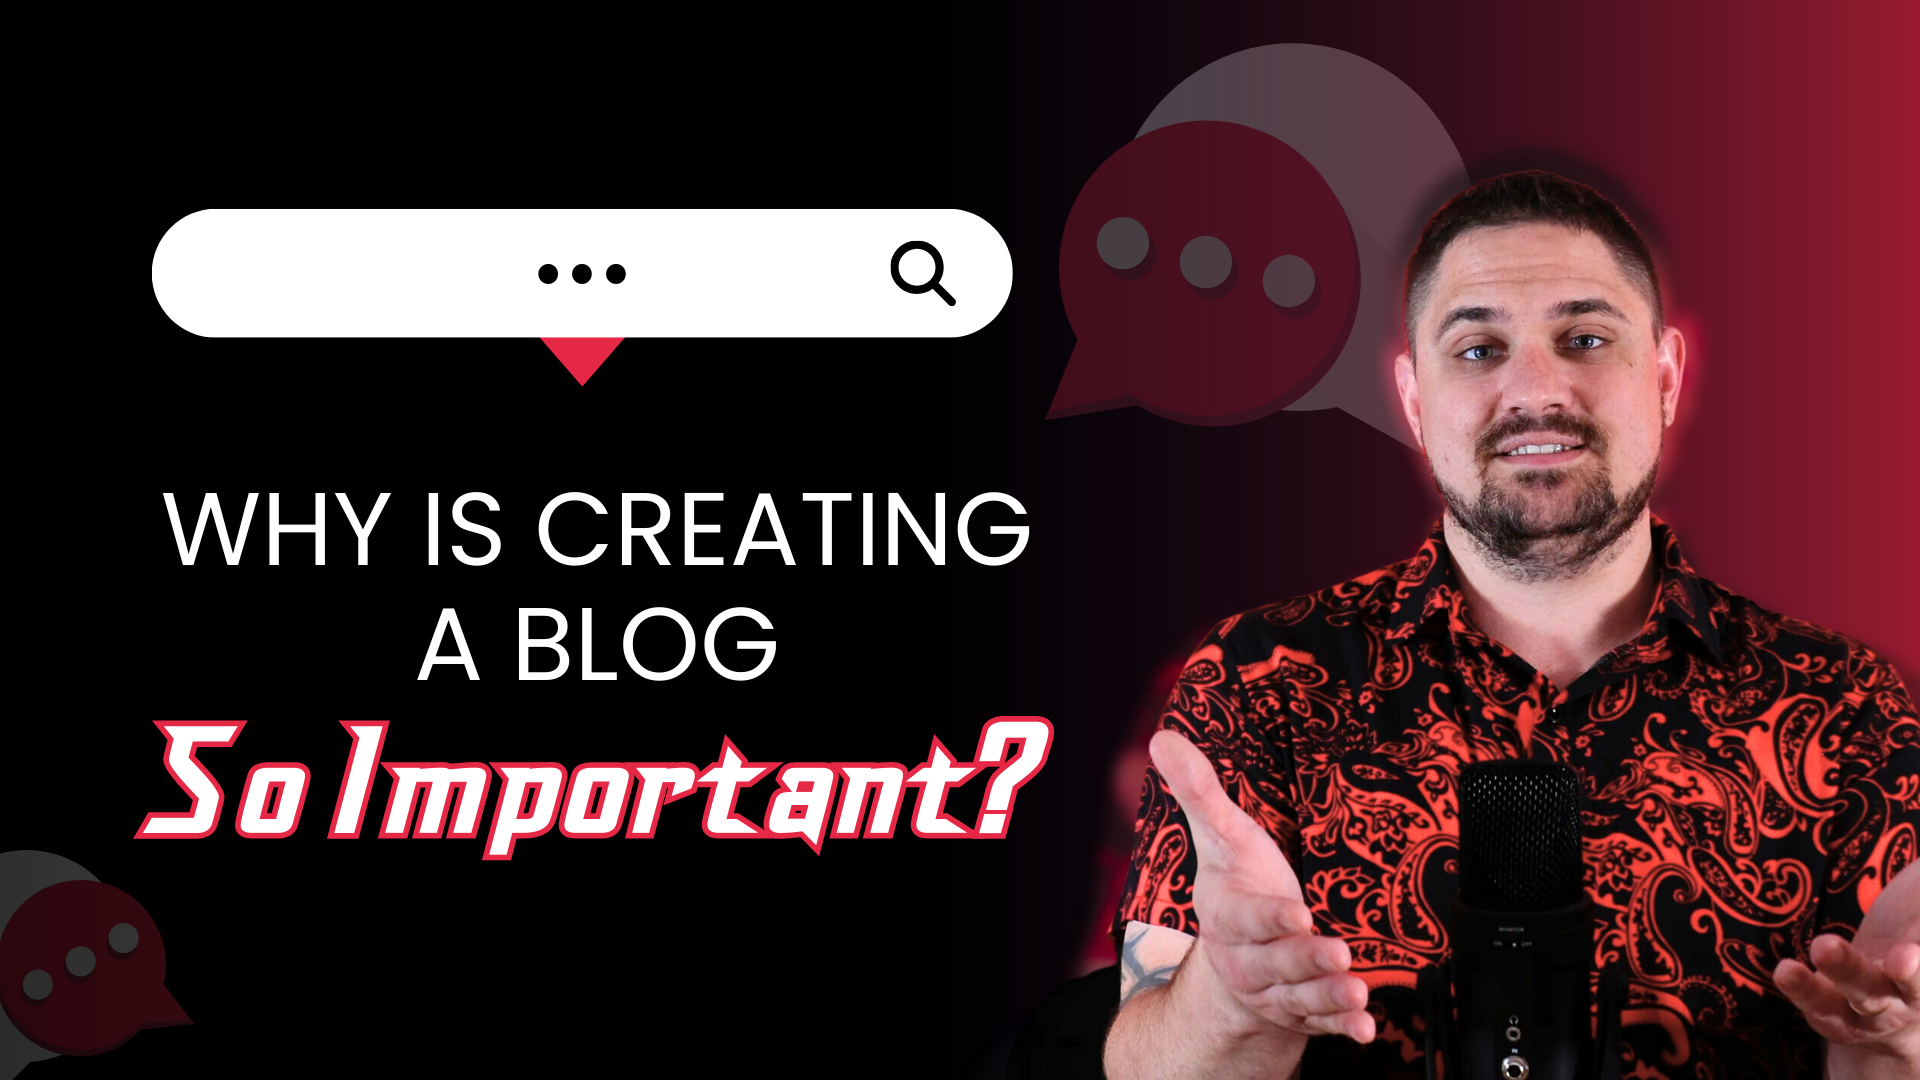 Why is creating a blog so important